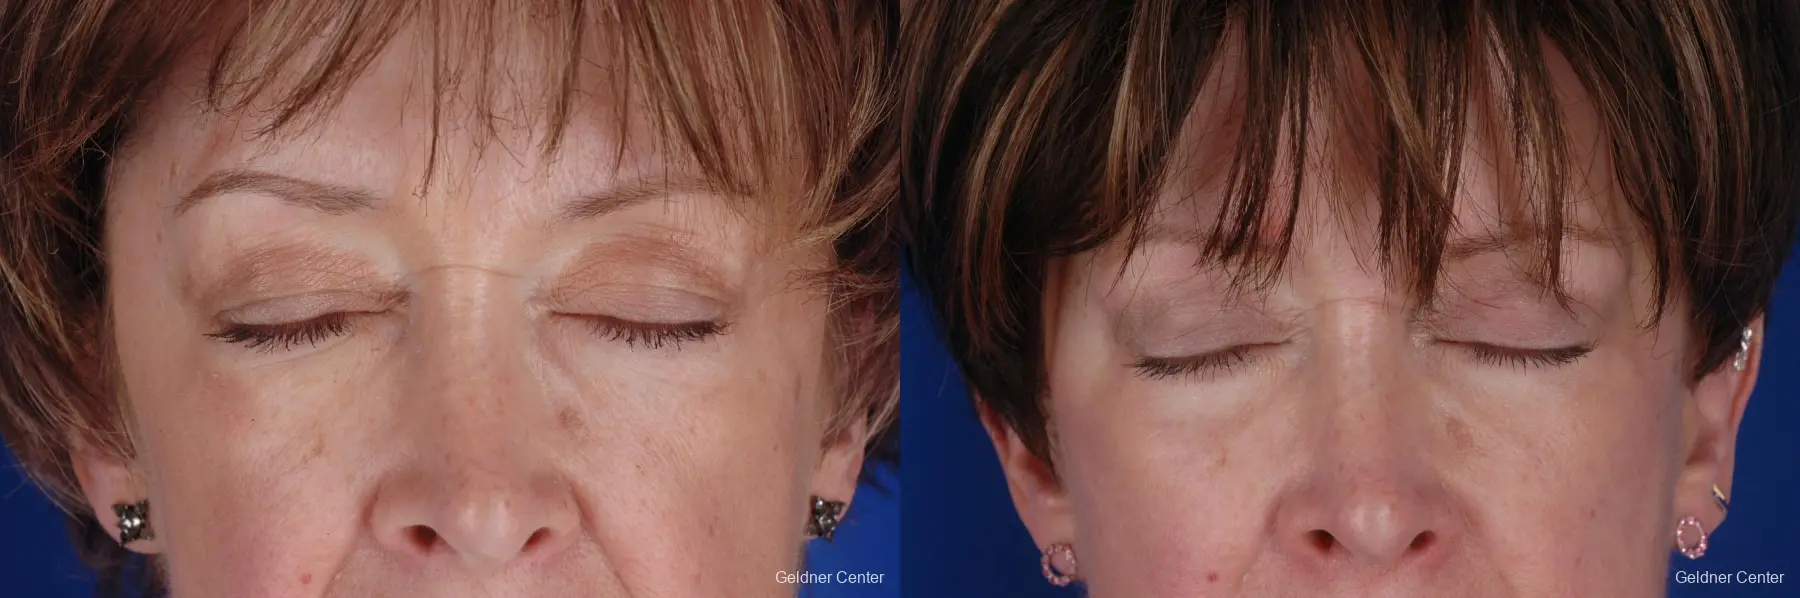 Eyelid Lift Streeterville, Chicago 2396 - Before and After 2